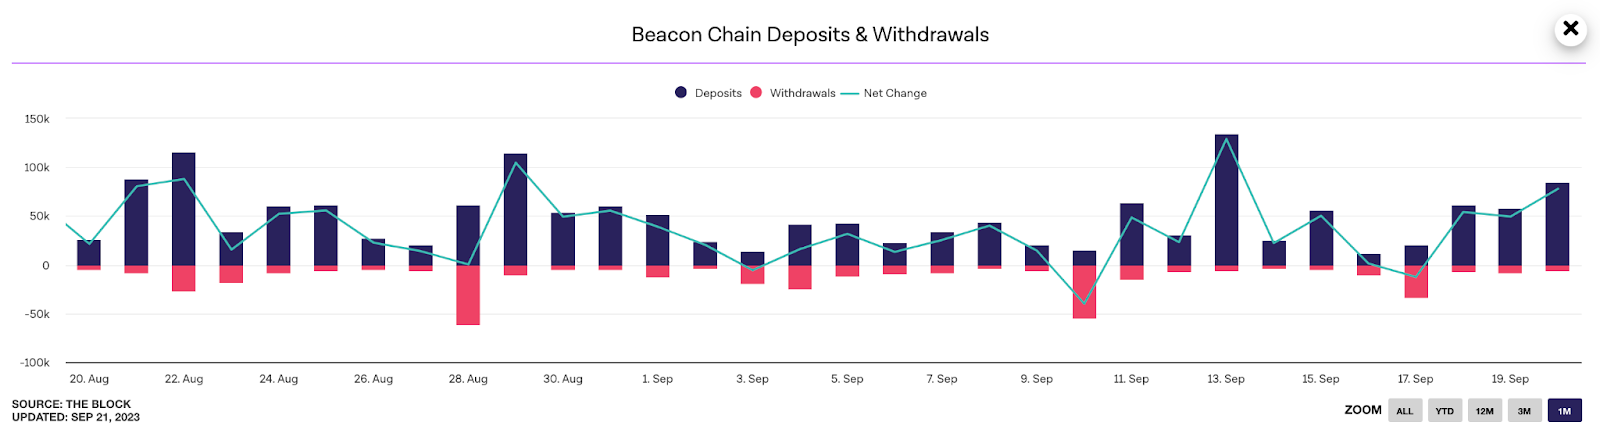 ETH 2.0 Staking Crosses 30M —How Will Ethereum Price React | Beacon Chain Deposits vs Withdrawals